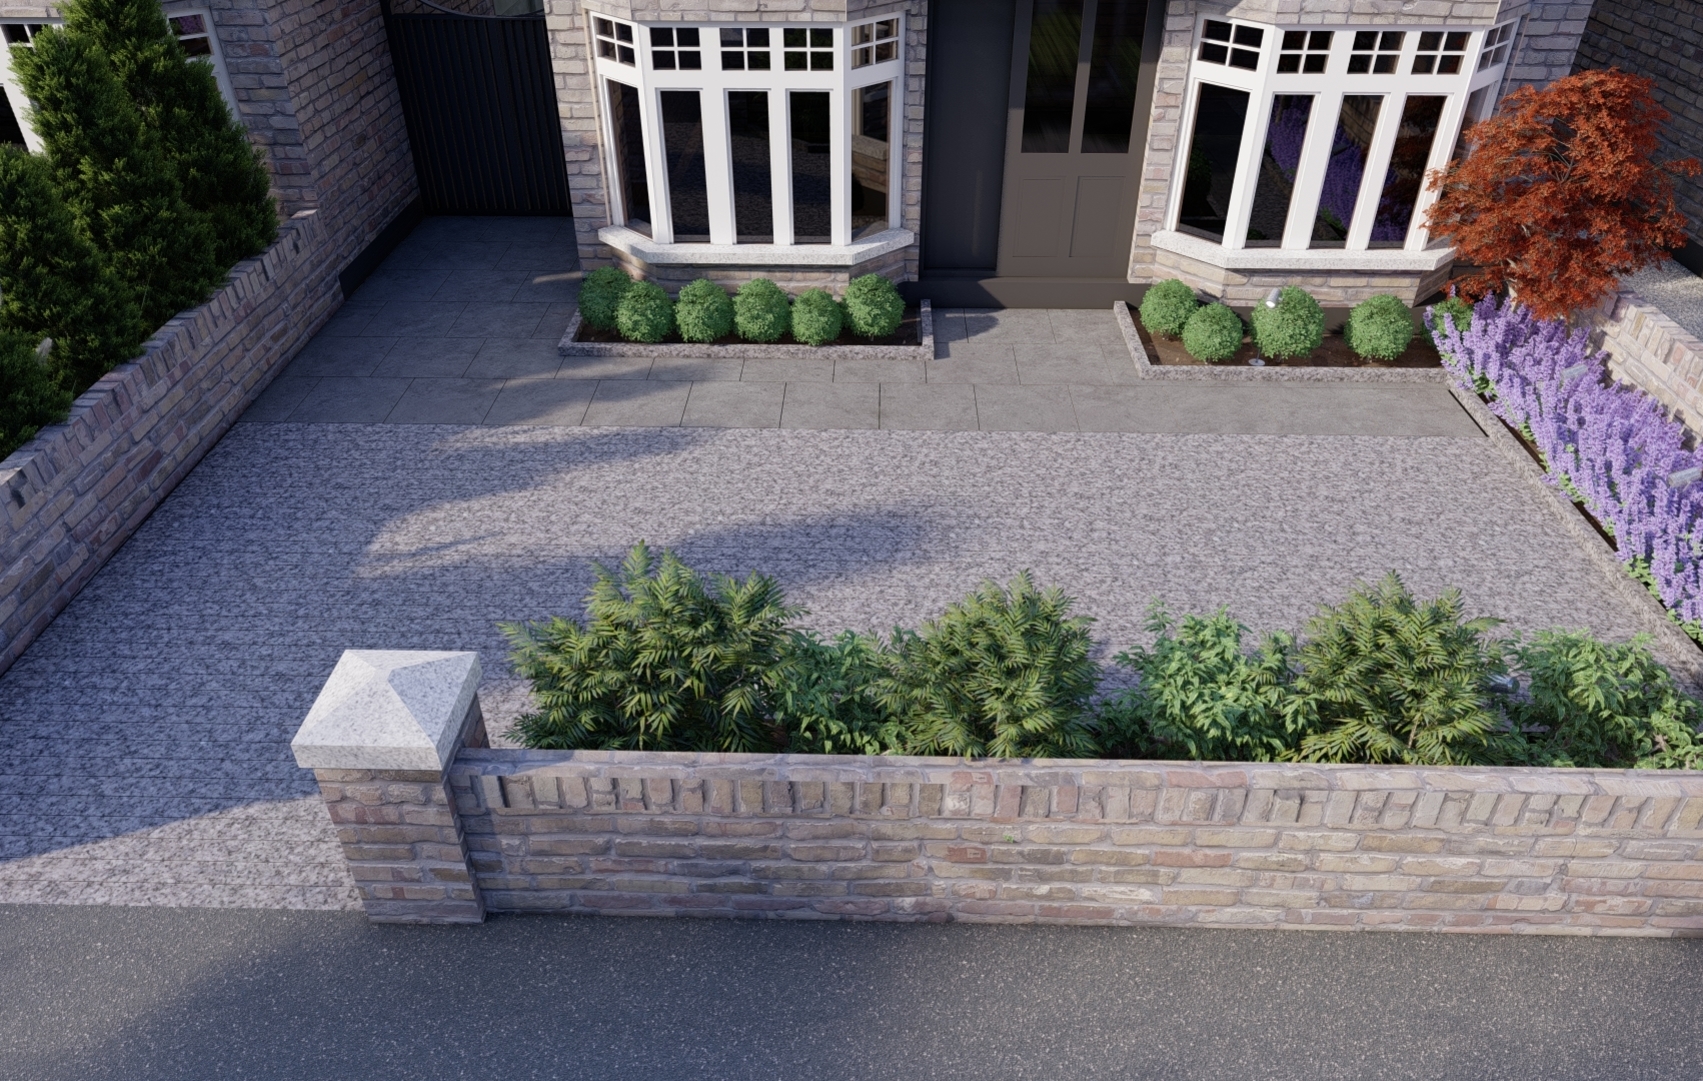 Professional Driveway design featuring natural stone paving and lush planting borders | Owen Chubb Tel 087-2306 128